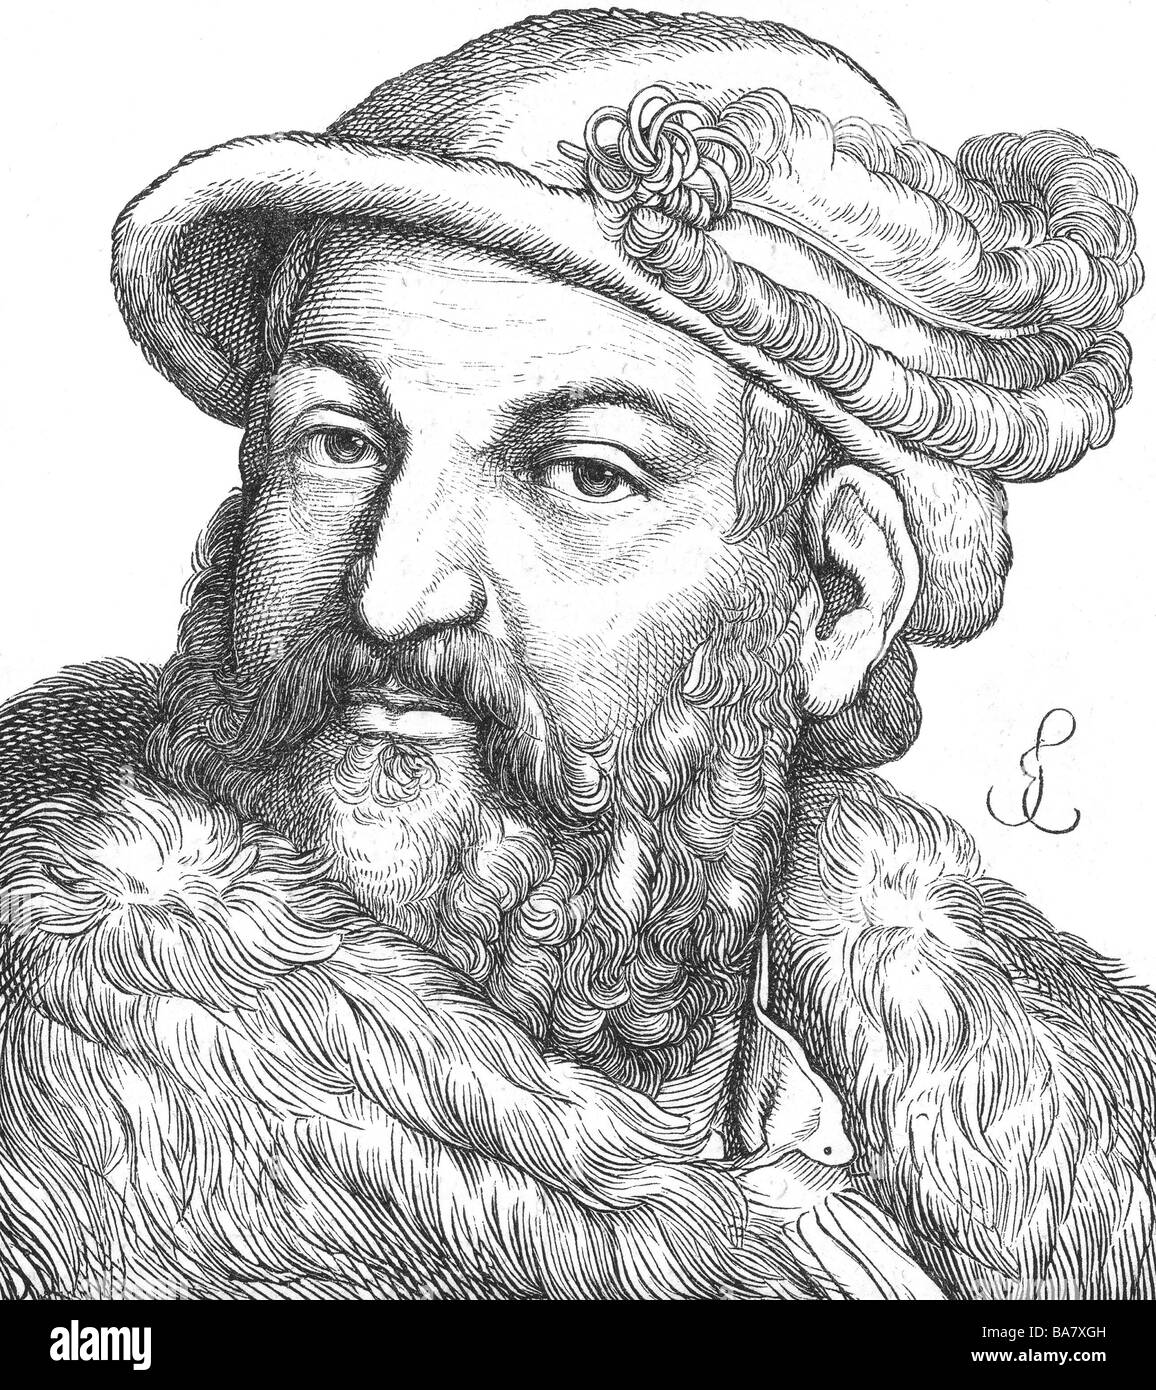 Joachim II Hector, 9.1.1505 - 3.1.1571, Elector of Brandenburg 1535 - 1571, portrait, copper engraving, 19th century, after contemporaneous image, Artist's Copyright has not to be cleared Stock Photo